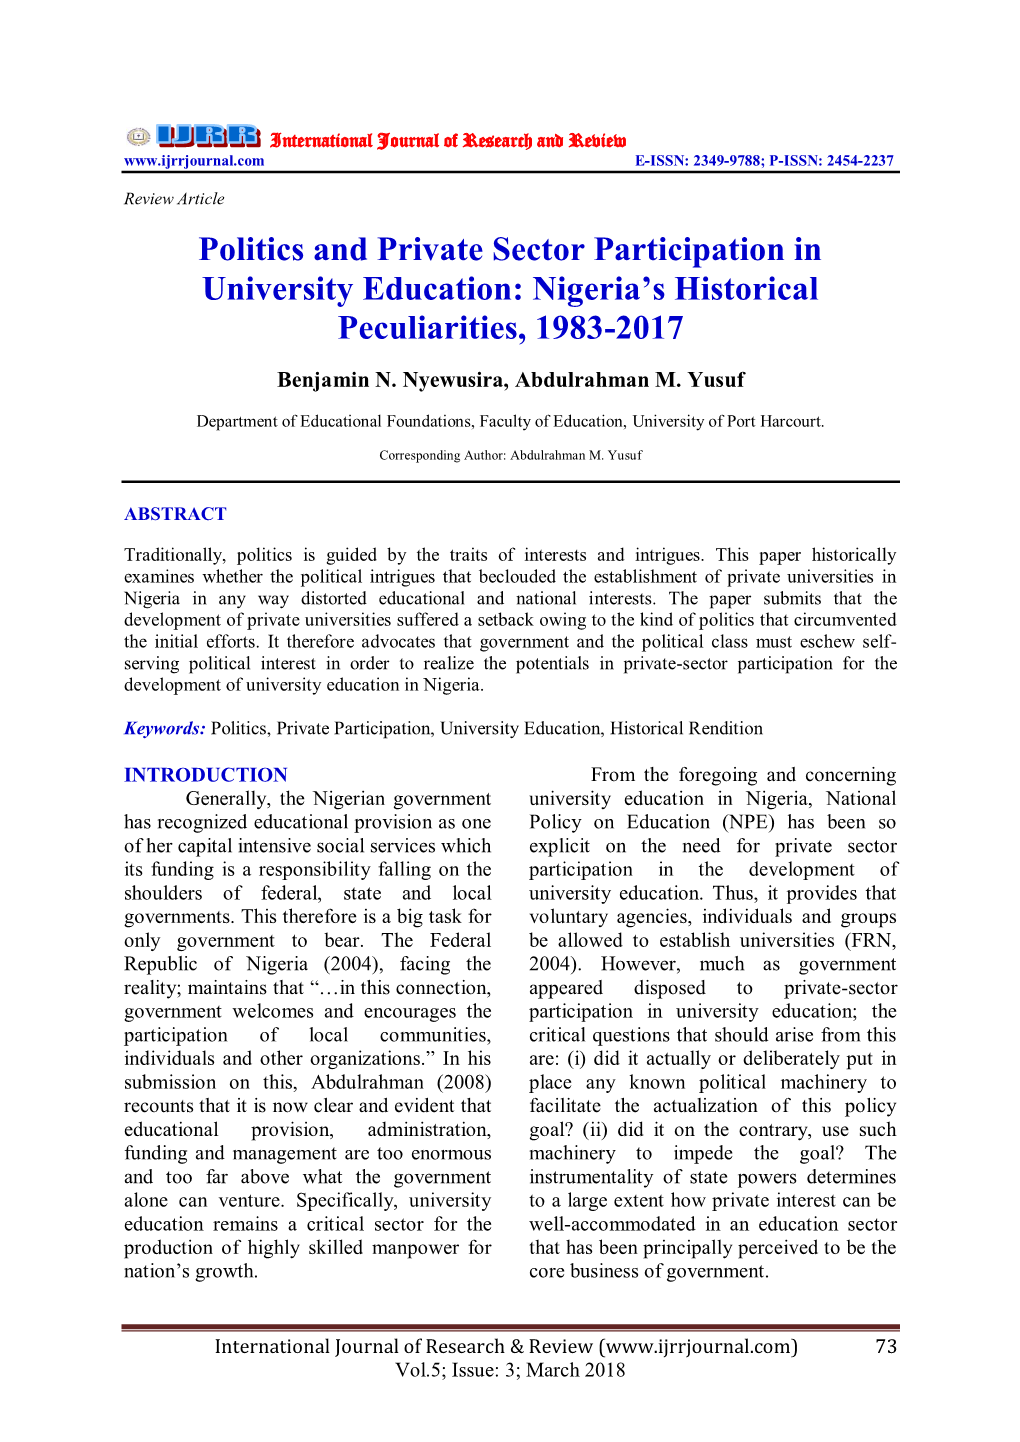 Politics and Private Sector Participation in University Education: Nigeria’S Historical Peculiarities, 1983-2017